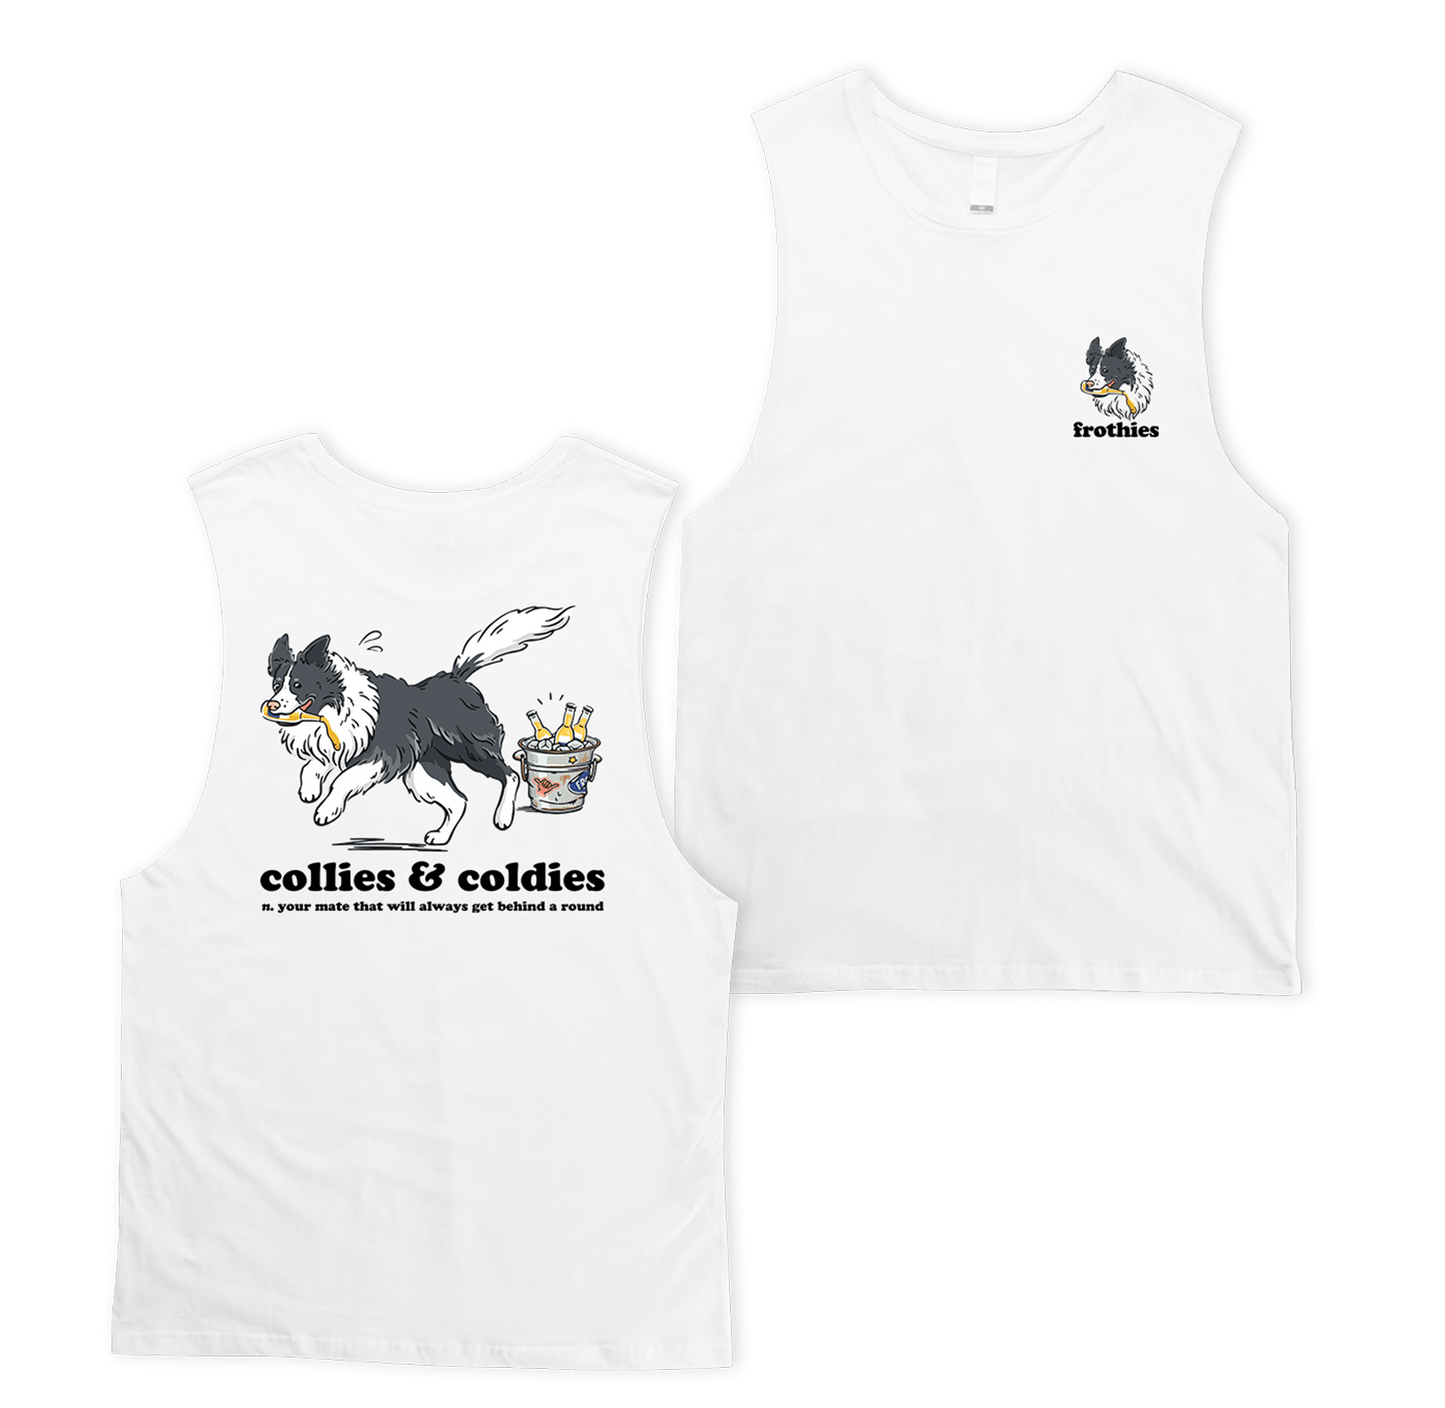 Collies & Coldies Muscle Tee Muscle Tanks Frothies